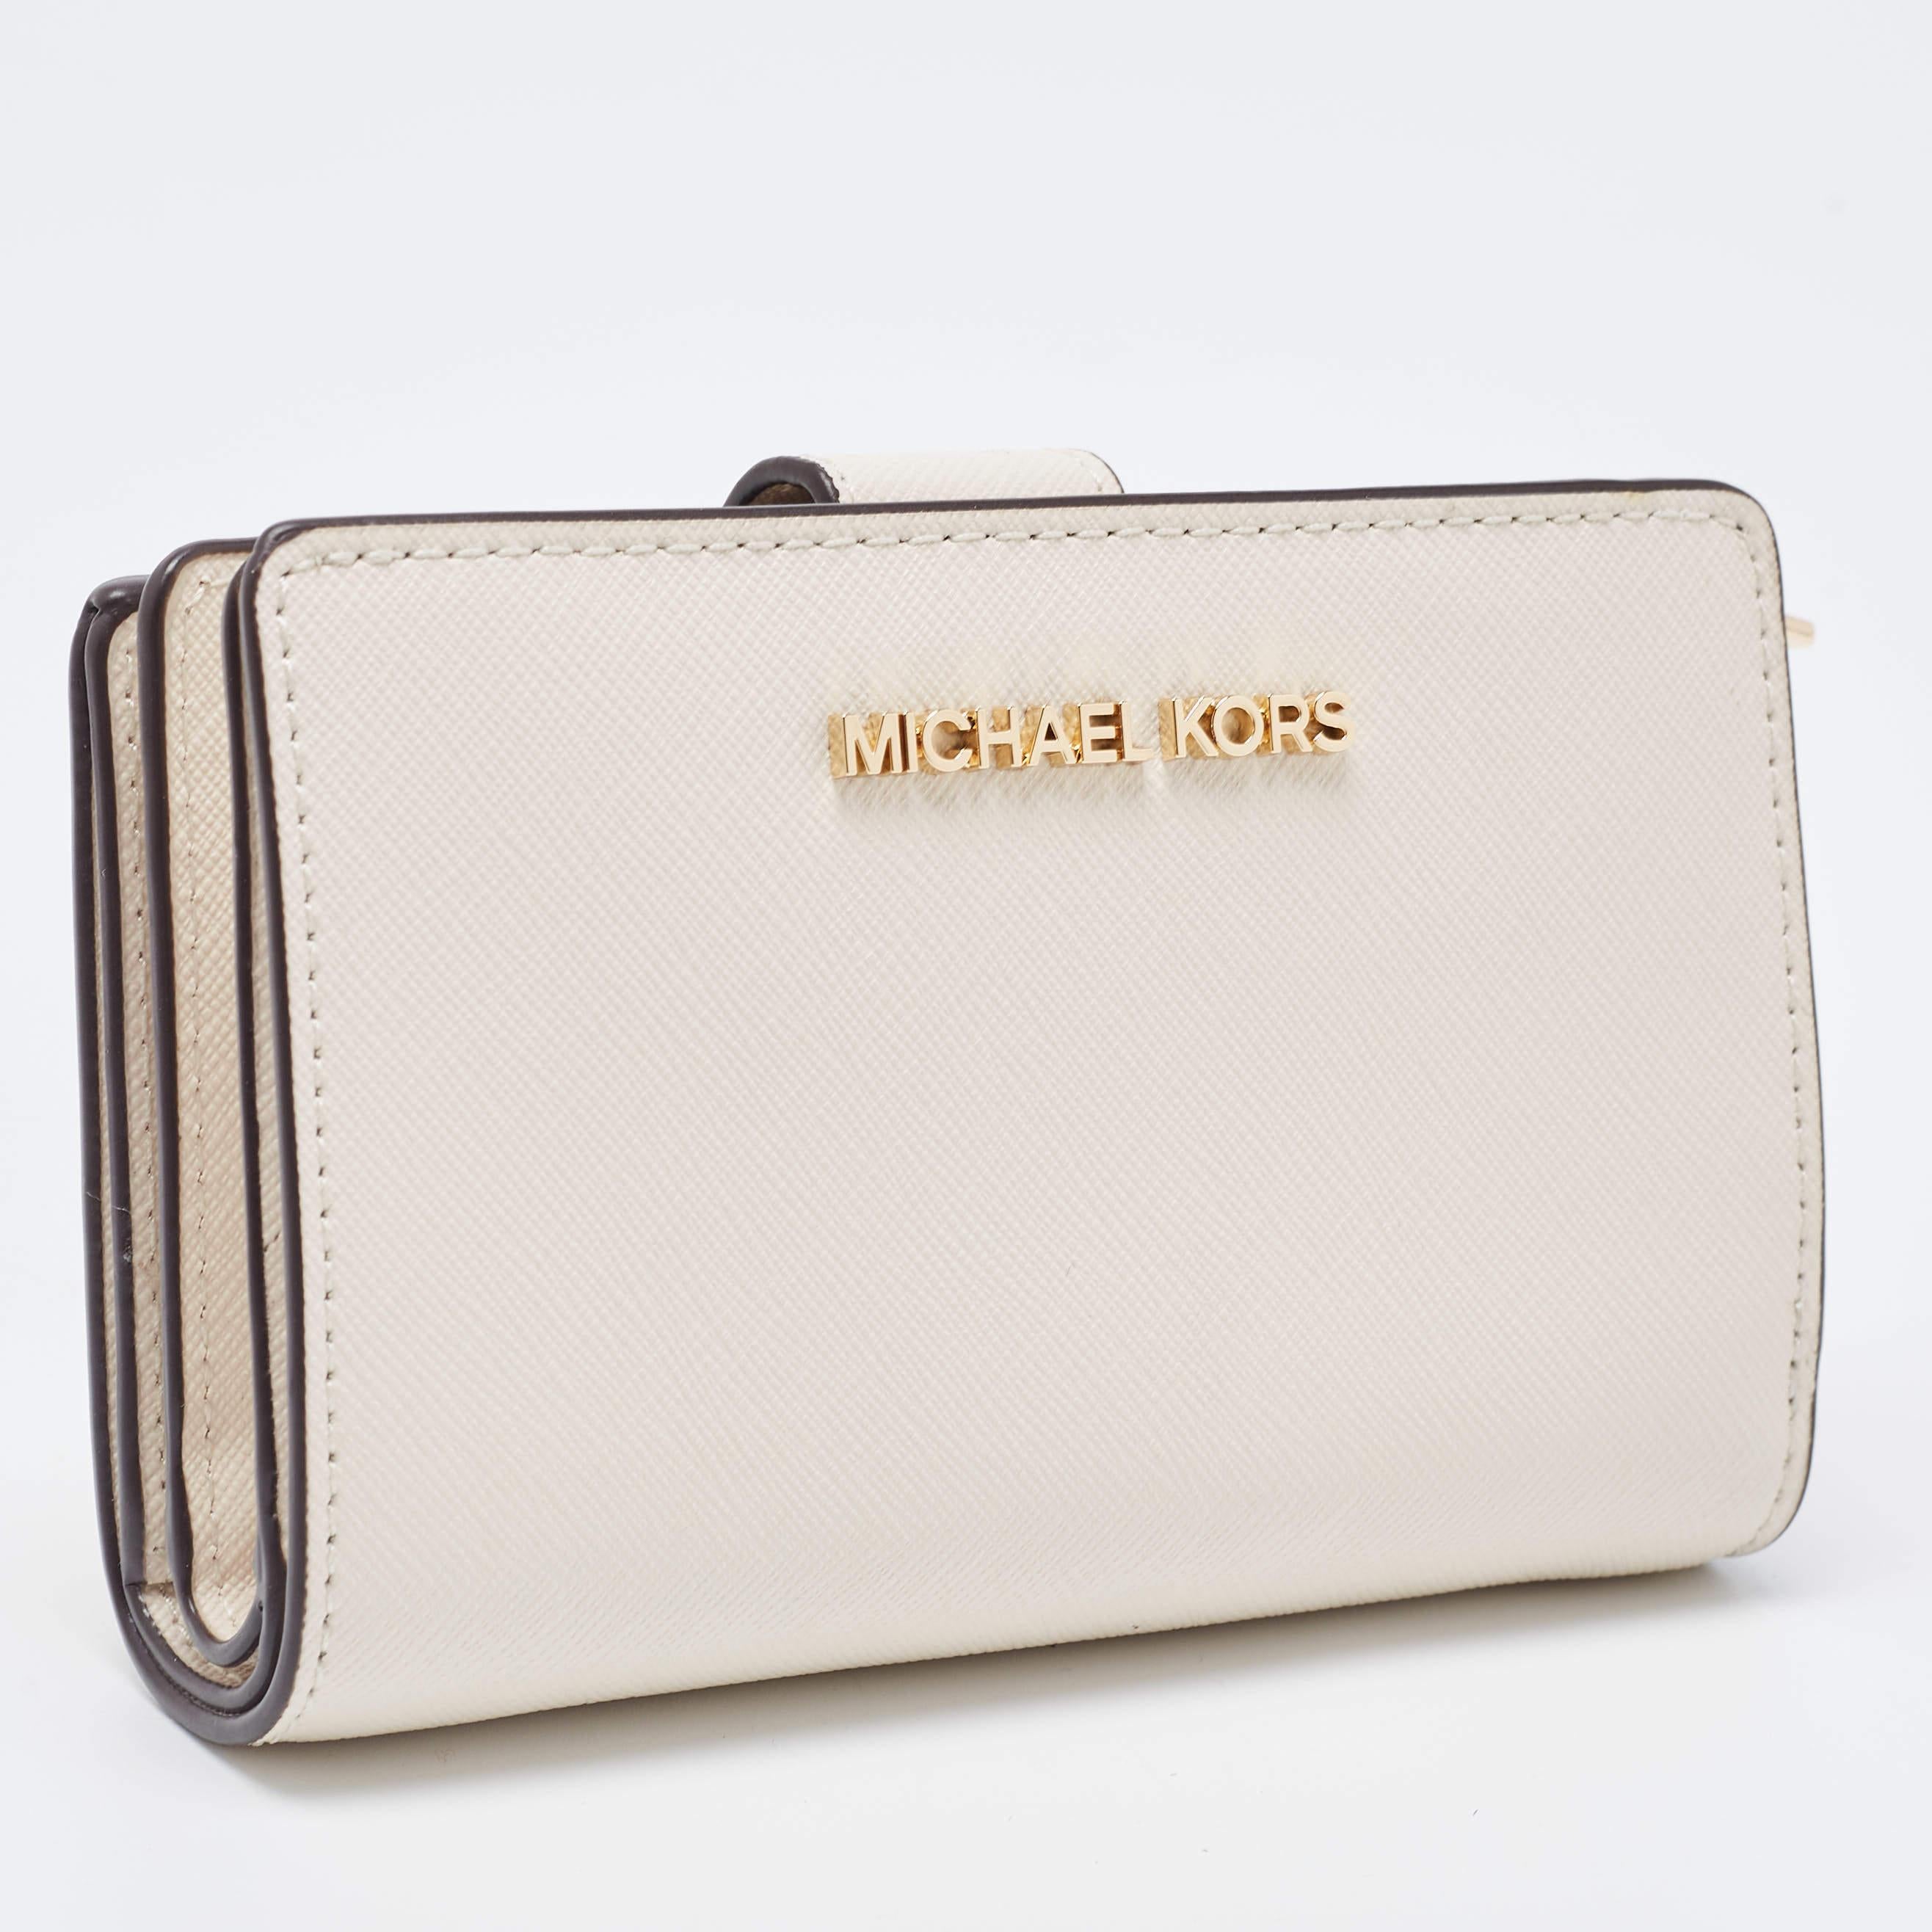 This MK wallet is an immaculate balance of sophistication and rational utility. It has been designed using prime quality materials and elevated by a sleek finish. The creation is equipped with ample space for your monetary essentials.

